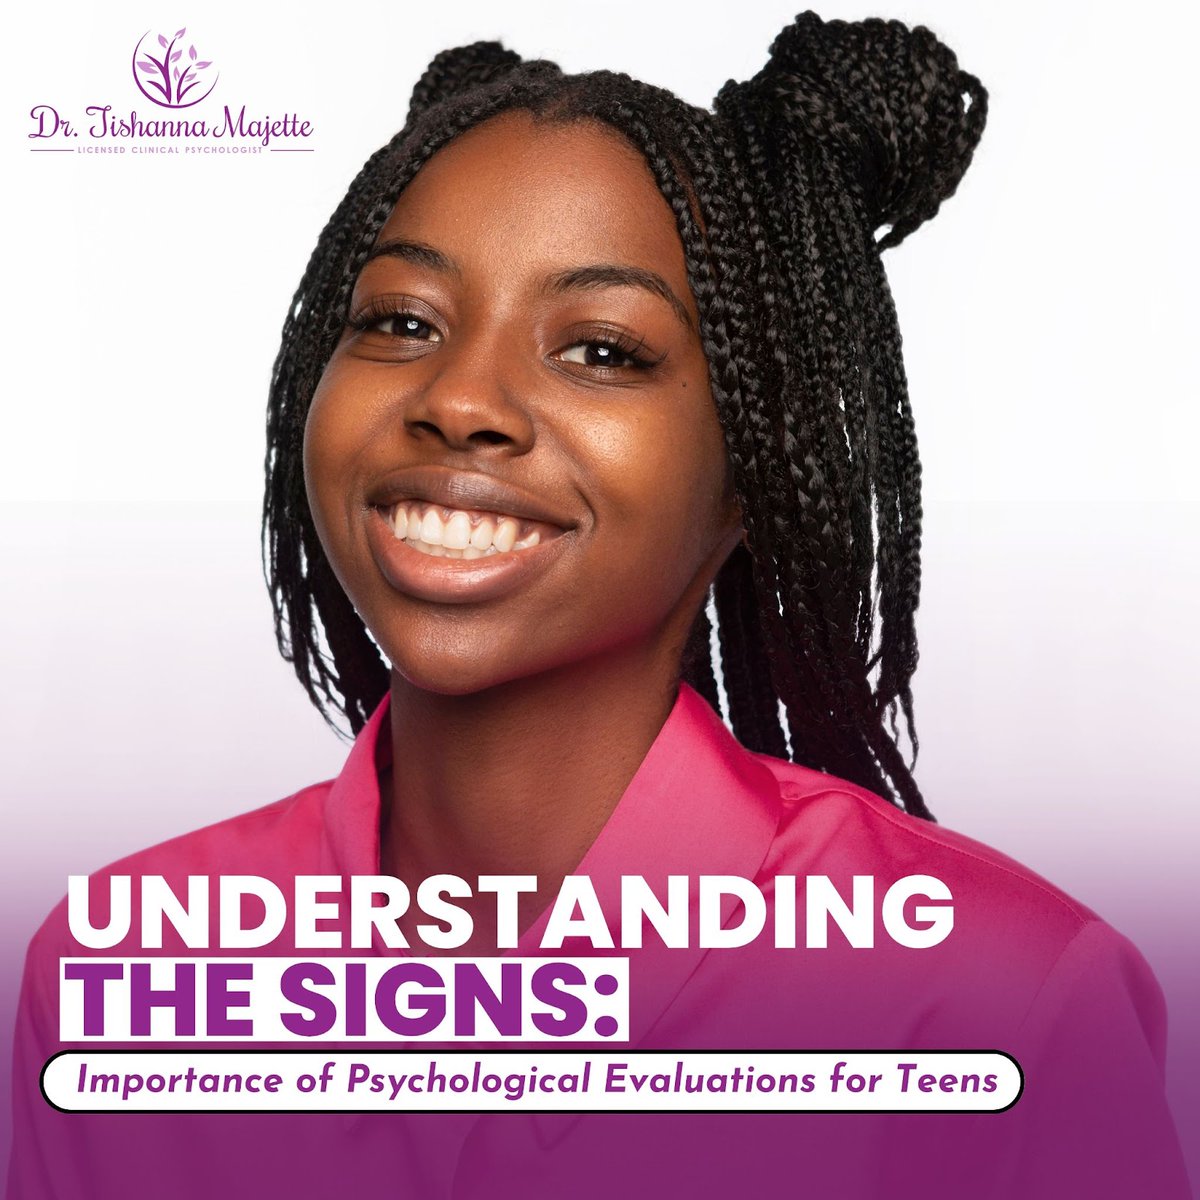 Learn about the importance of recognizing and addressing early signs of mental health challenges in teens through psychological evaluations.
-----
📧 doc@majetteadolescentservices.com or 
📞 856-522-3123
.
#TeenWellBeing #PsychologicalAssessment #EarlyIntervention